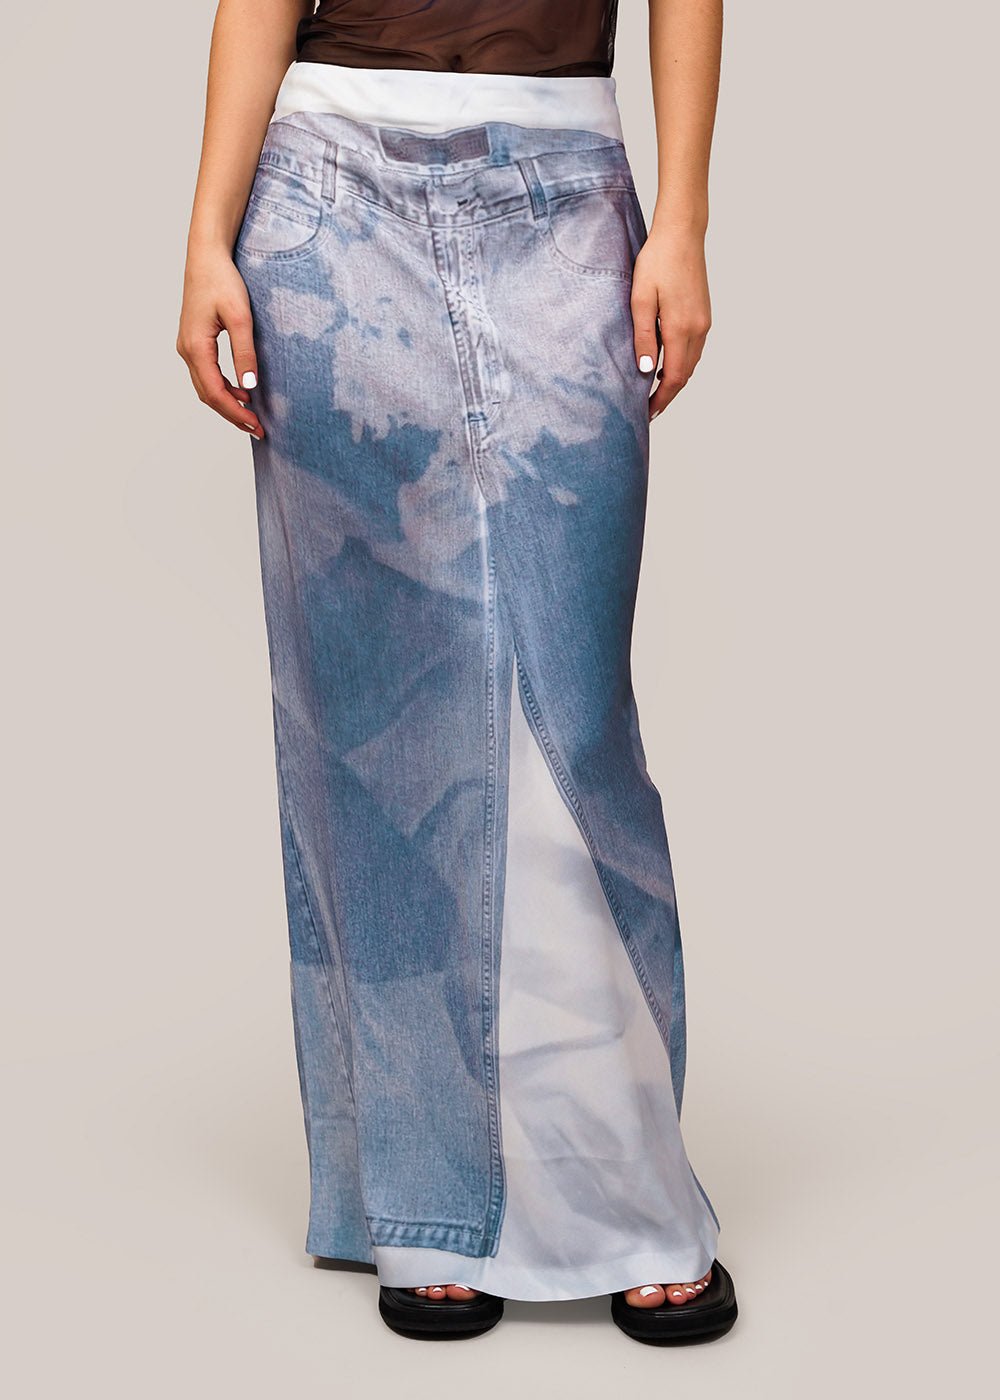 https://newclassics.ca/cdn/shop/products/elliss-handy-jean-print-silky-ankle-skirt-new-classics-studios-sustainable-and-ethical-fashion-canada-490055_1000x.jpg?v=1687282034